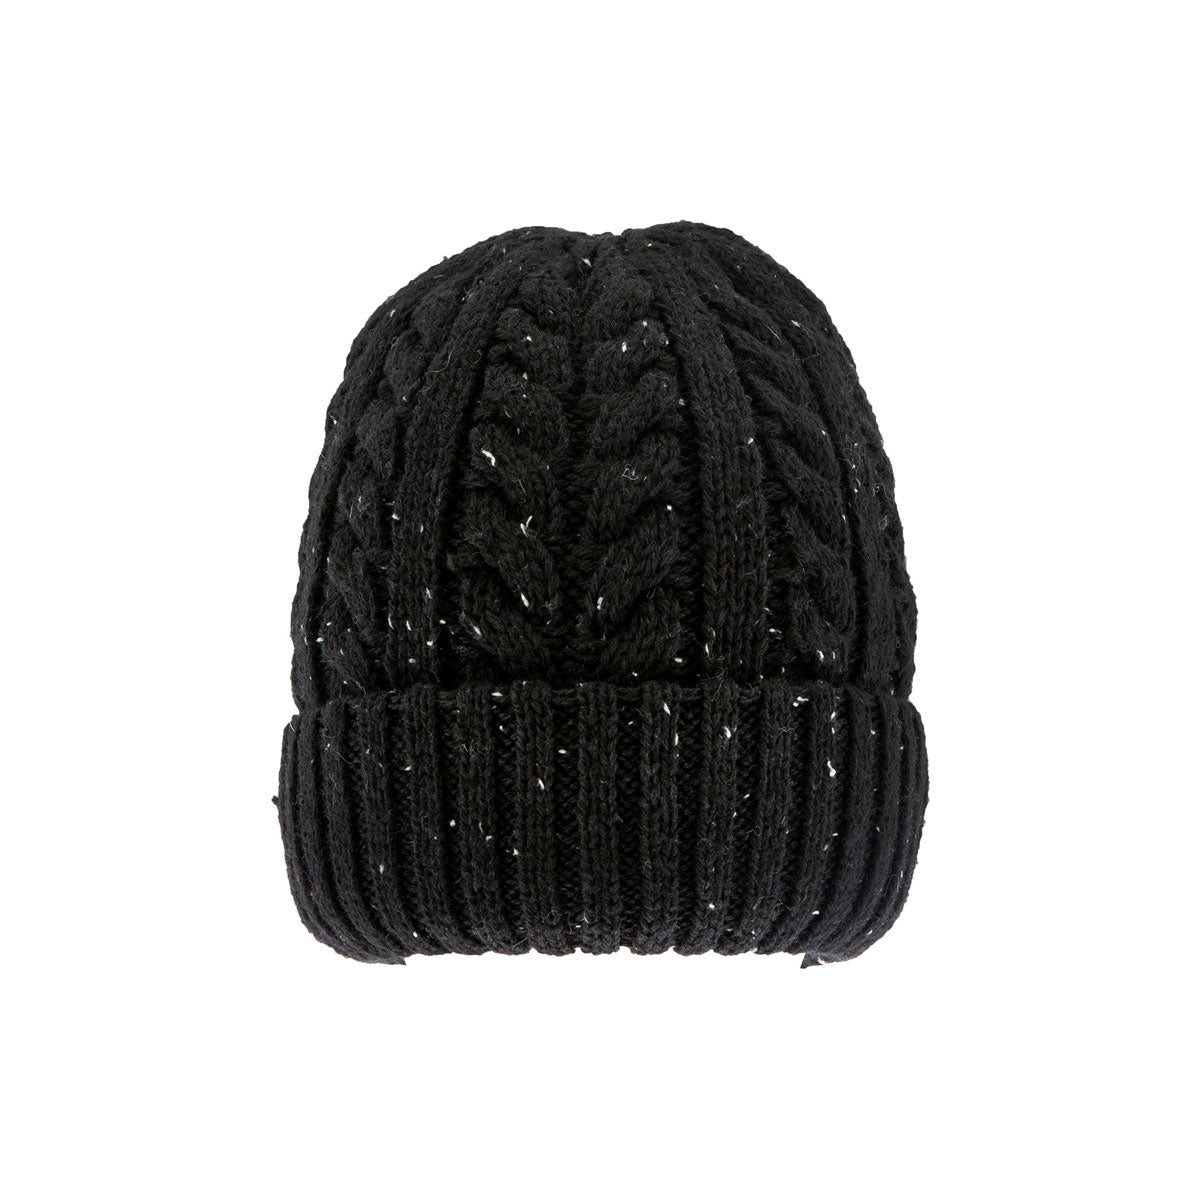 Men's cable knit wool blend knitted beanie hat